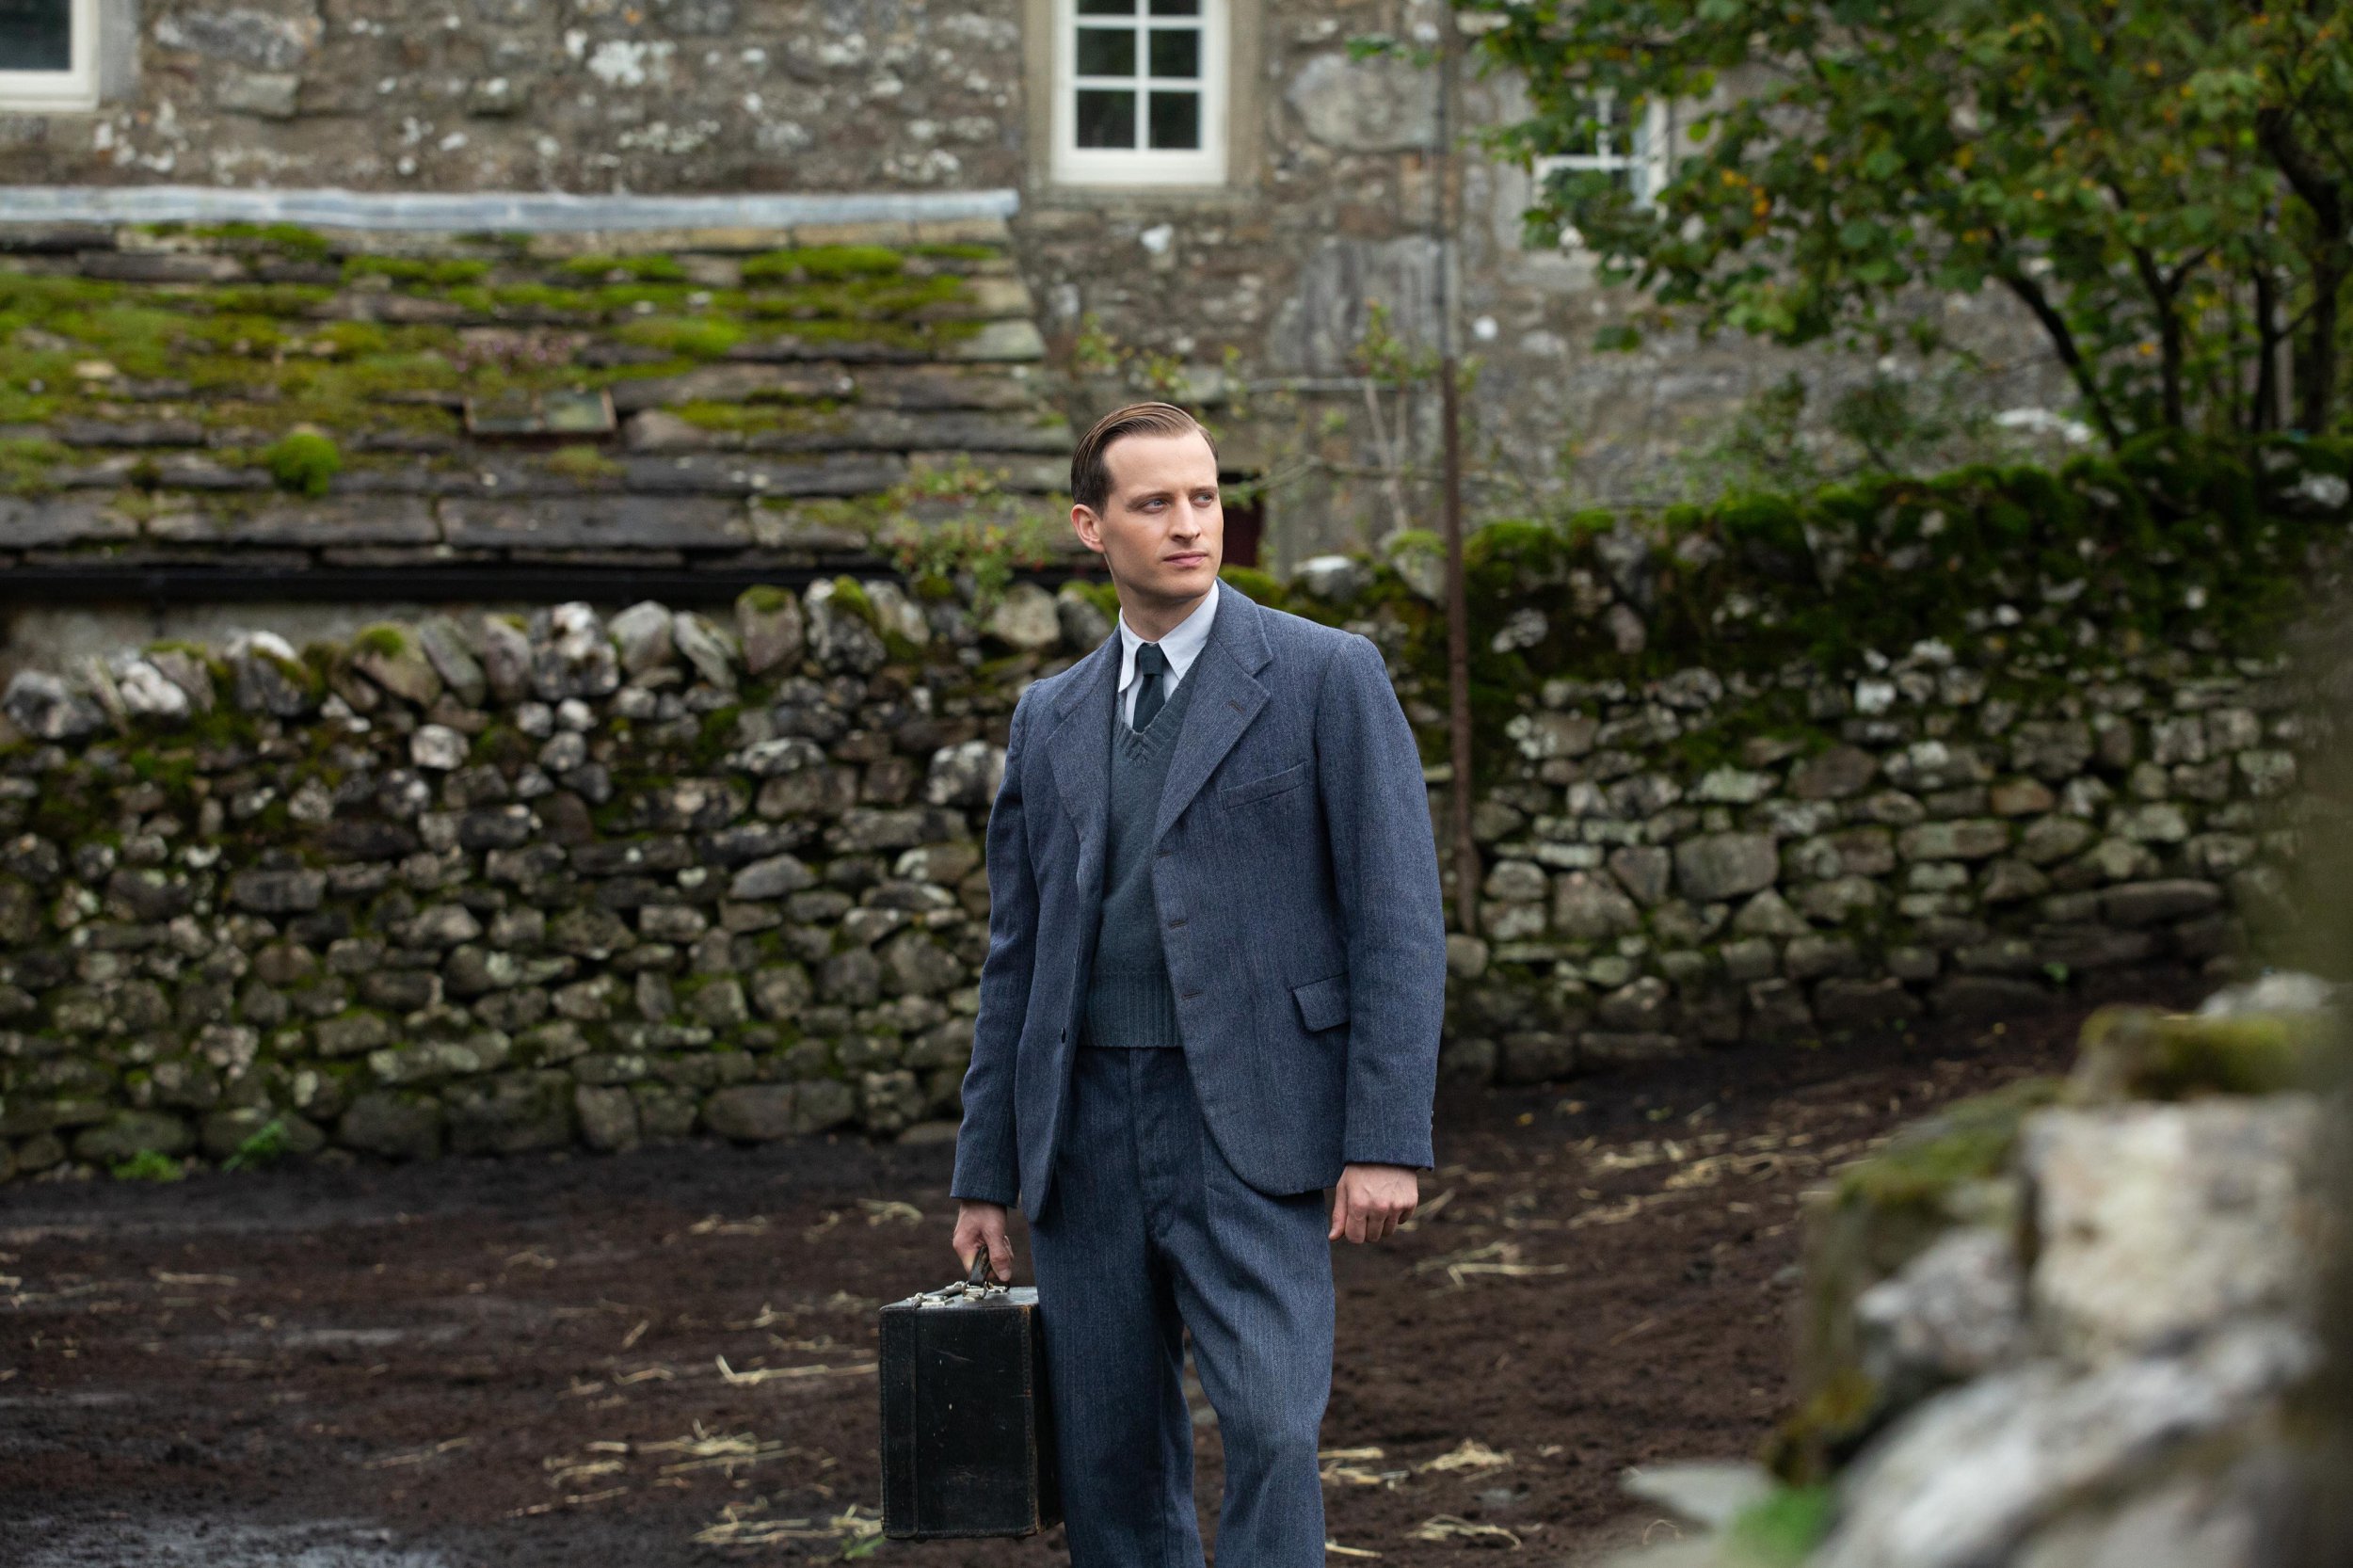 James Herriot with his briefcase in a shot from All Creatures Great and Small, 2020. (Photo by Playground Entertainment/PBS).